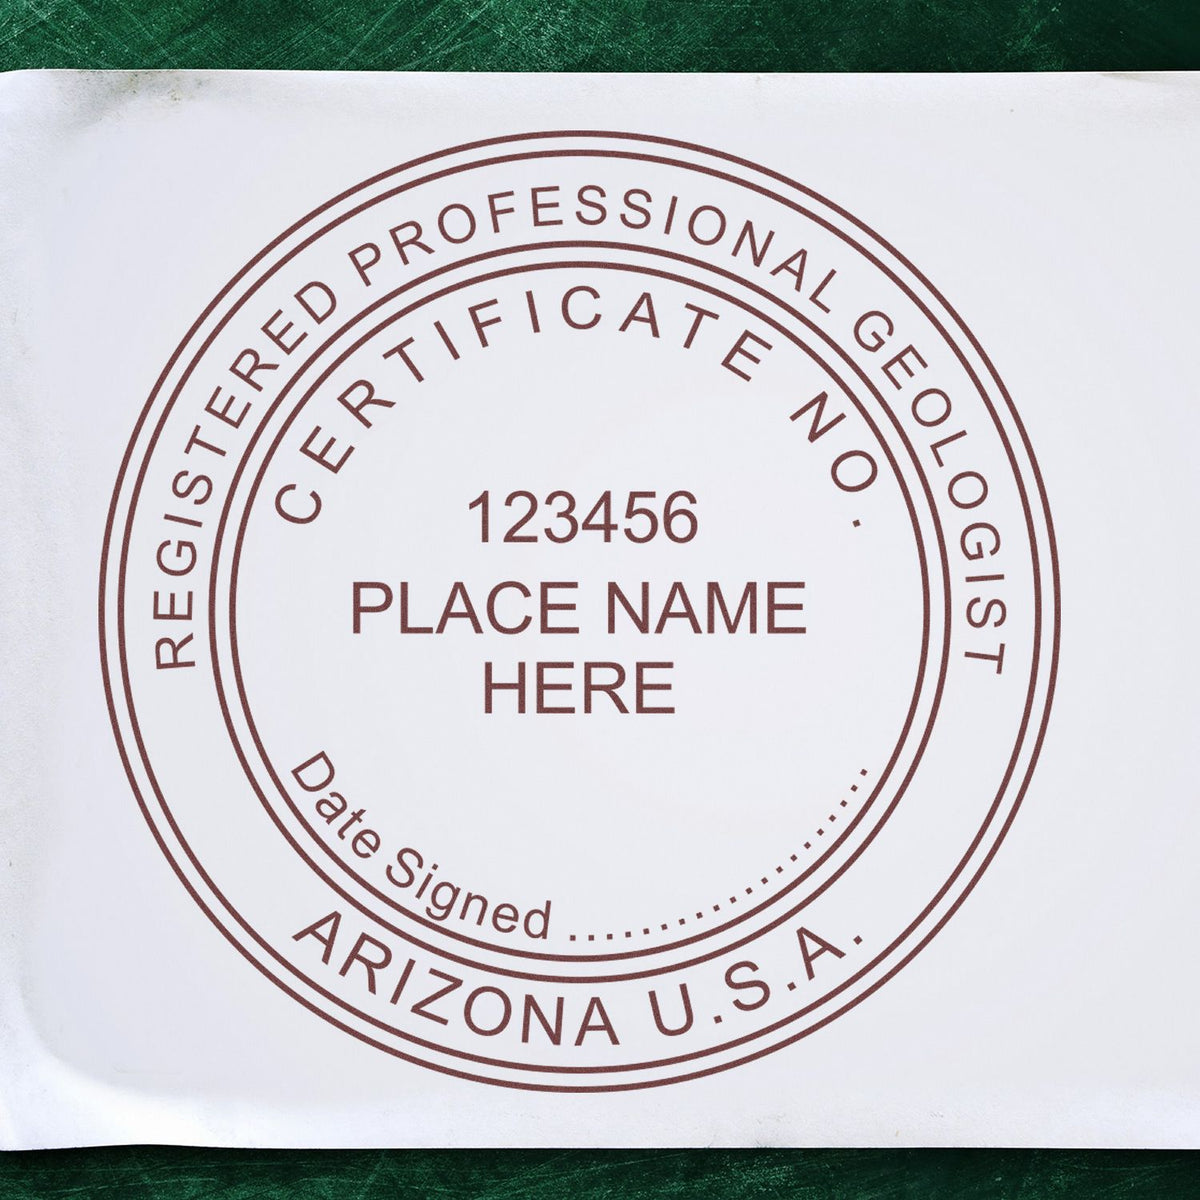 Another Example of a stamped impression of the Digital Arizona Geologist Stamp, Electronic Seal for Arizona Geologist on a office form